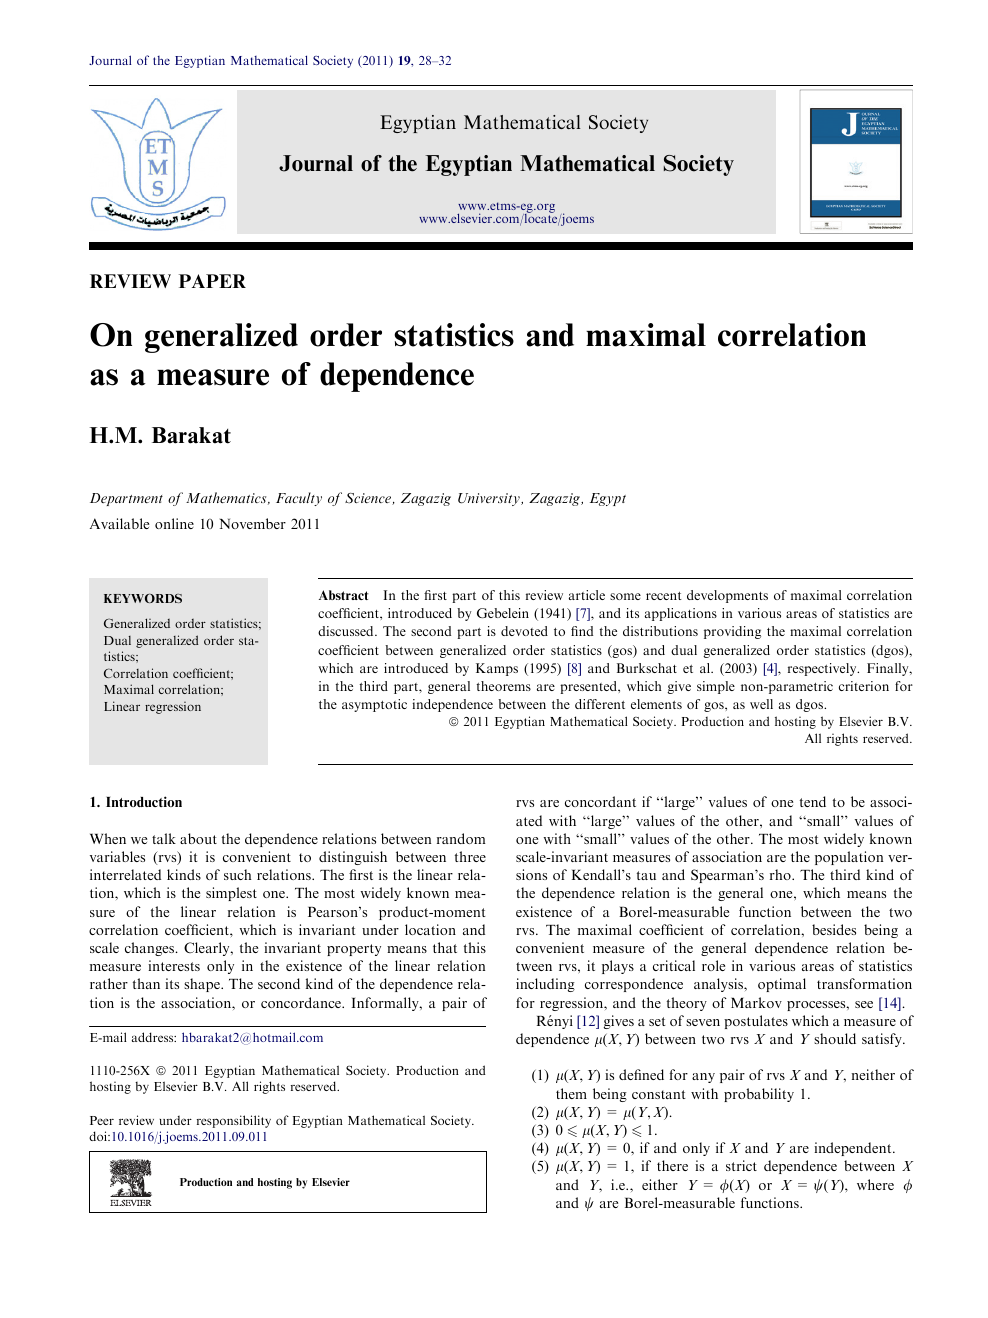 On Generalized Order Statistics And Maximal Correlation As A Measure Of Dependence Topic Of Research Paper In Mathematics Download Scholarly Article Pdf And Read For Free On Cyberleninka Open Science Hub